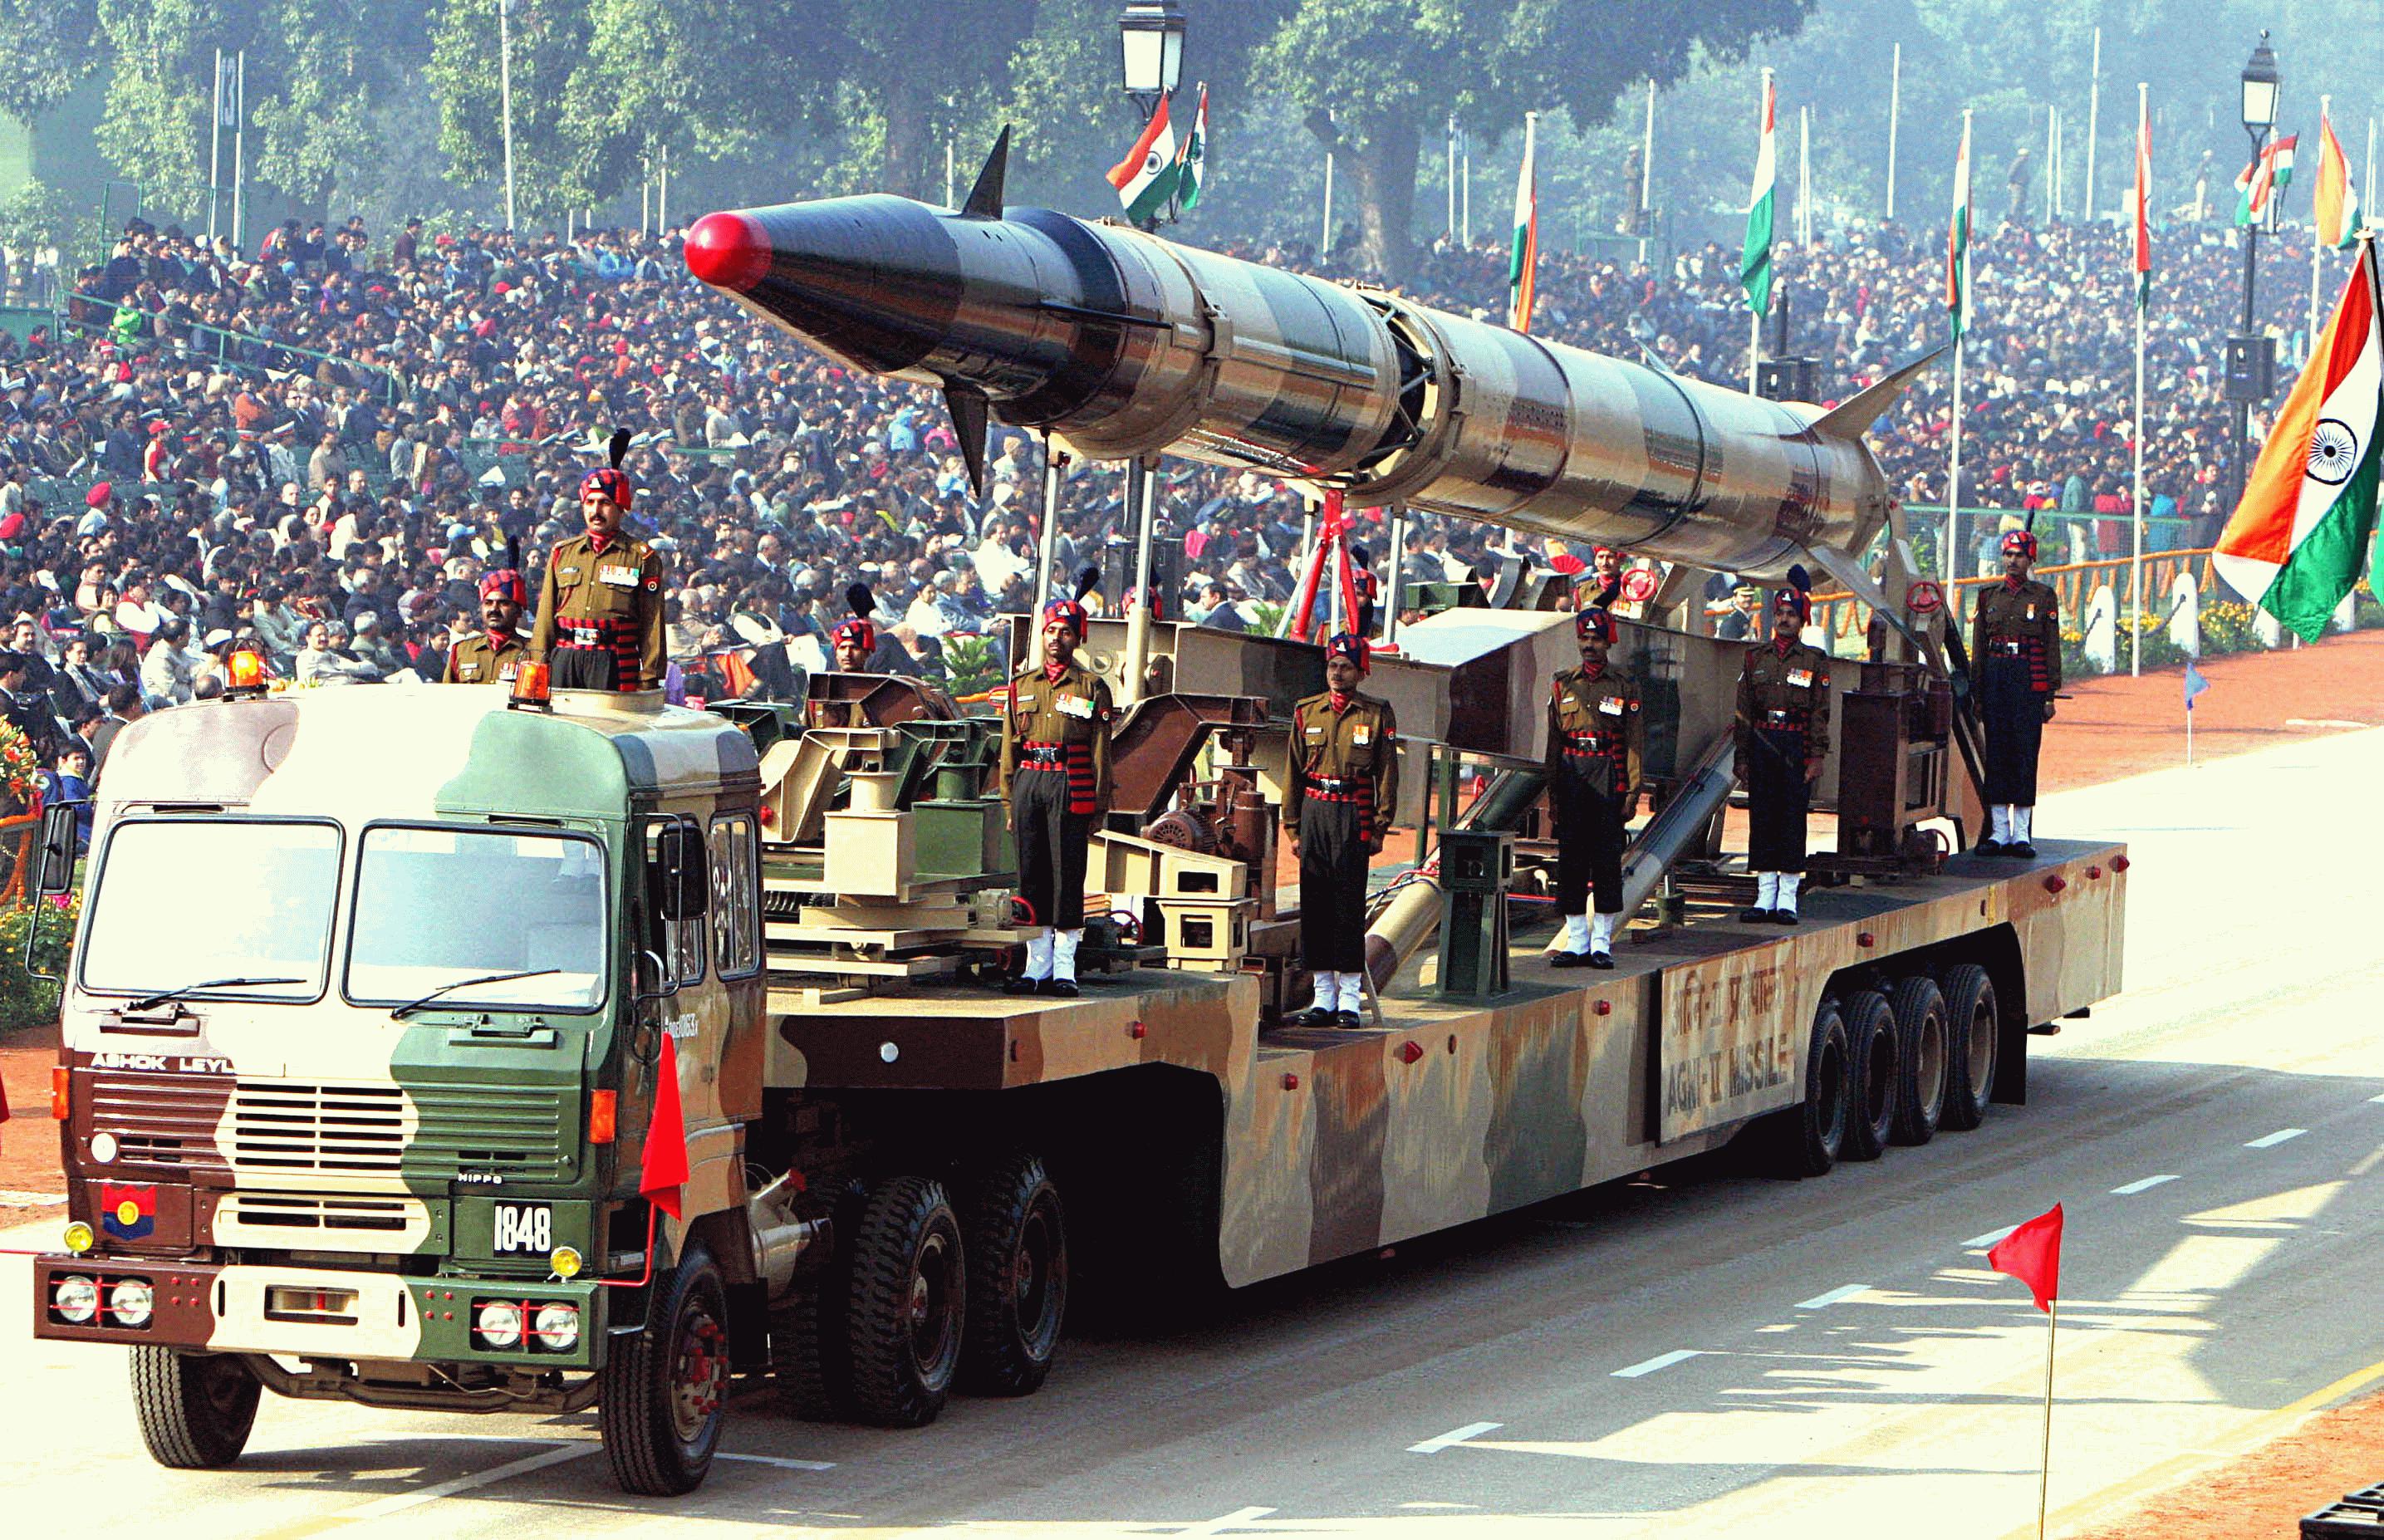 Disaster in South Asia: Nuclear Deployments & Violent Extremism